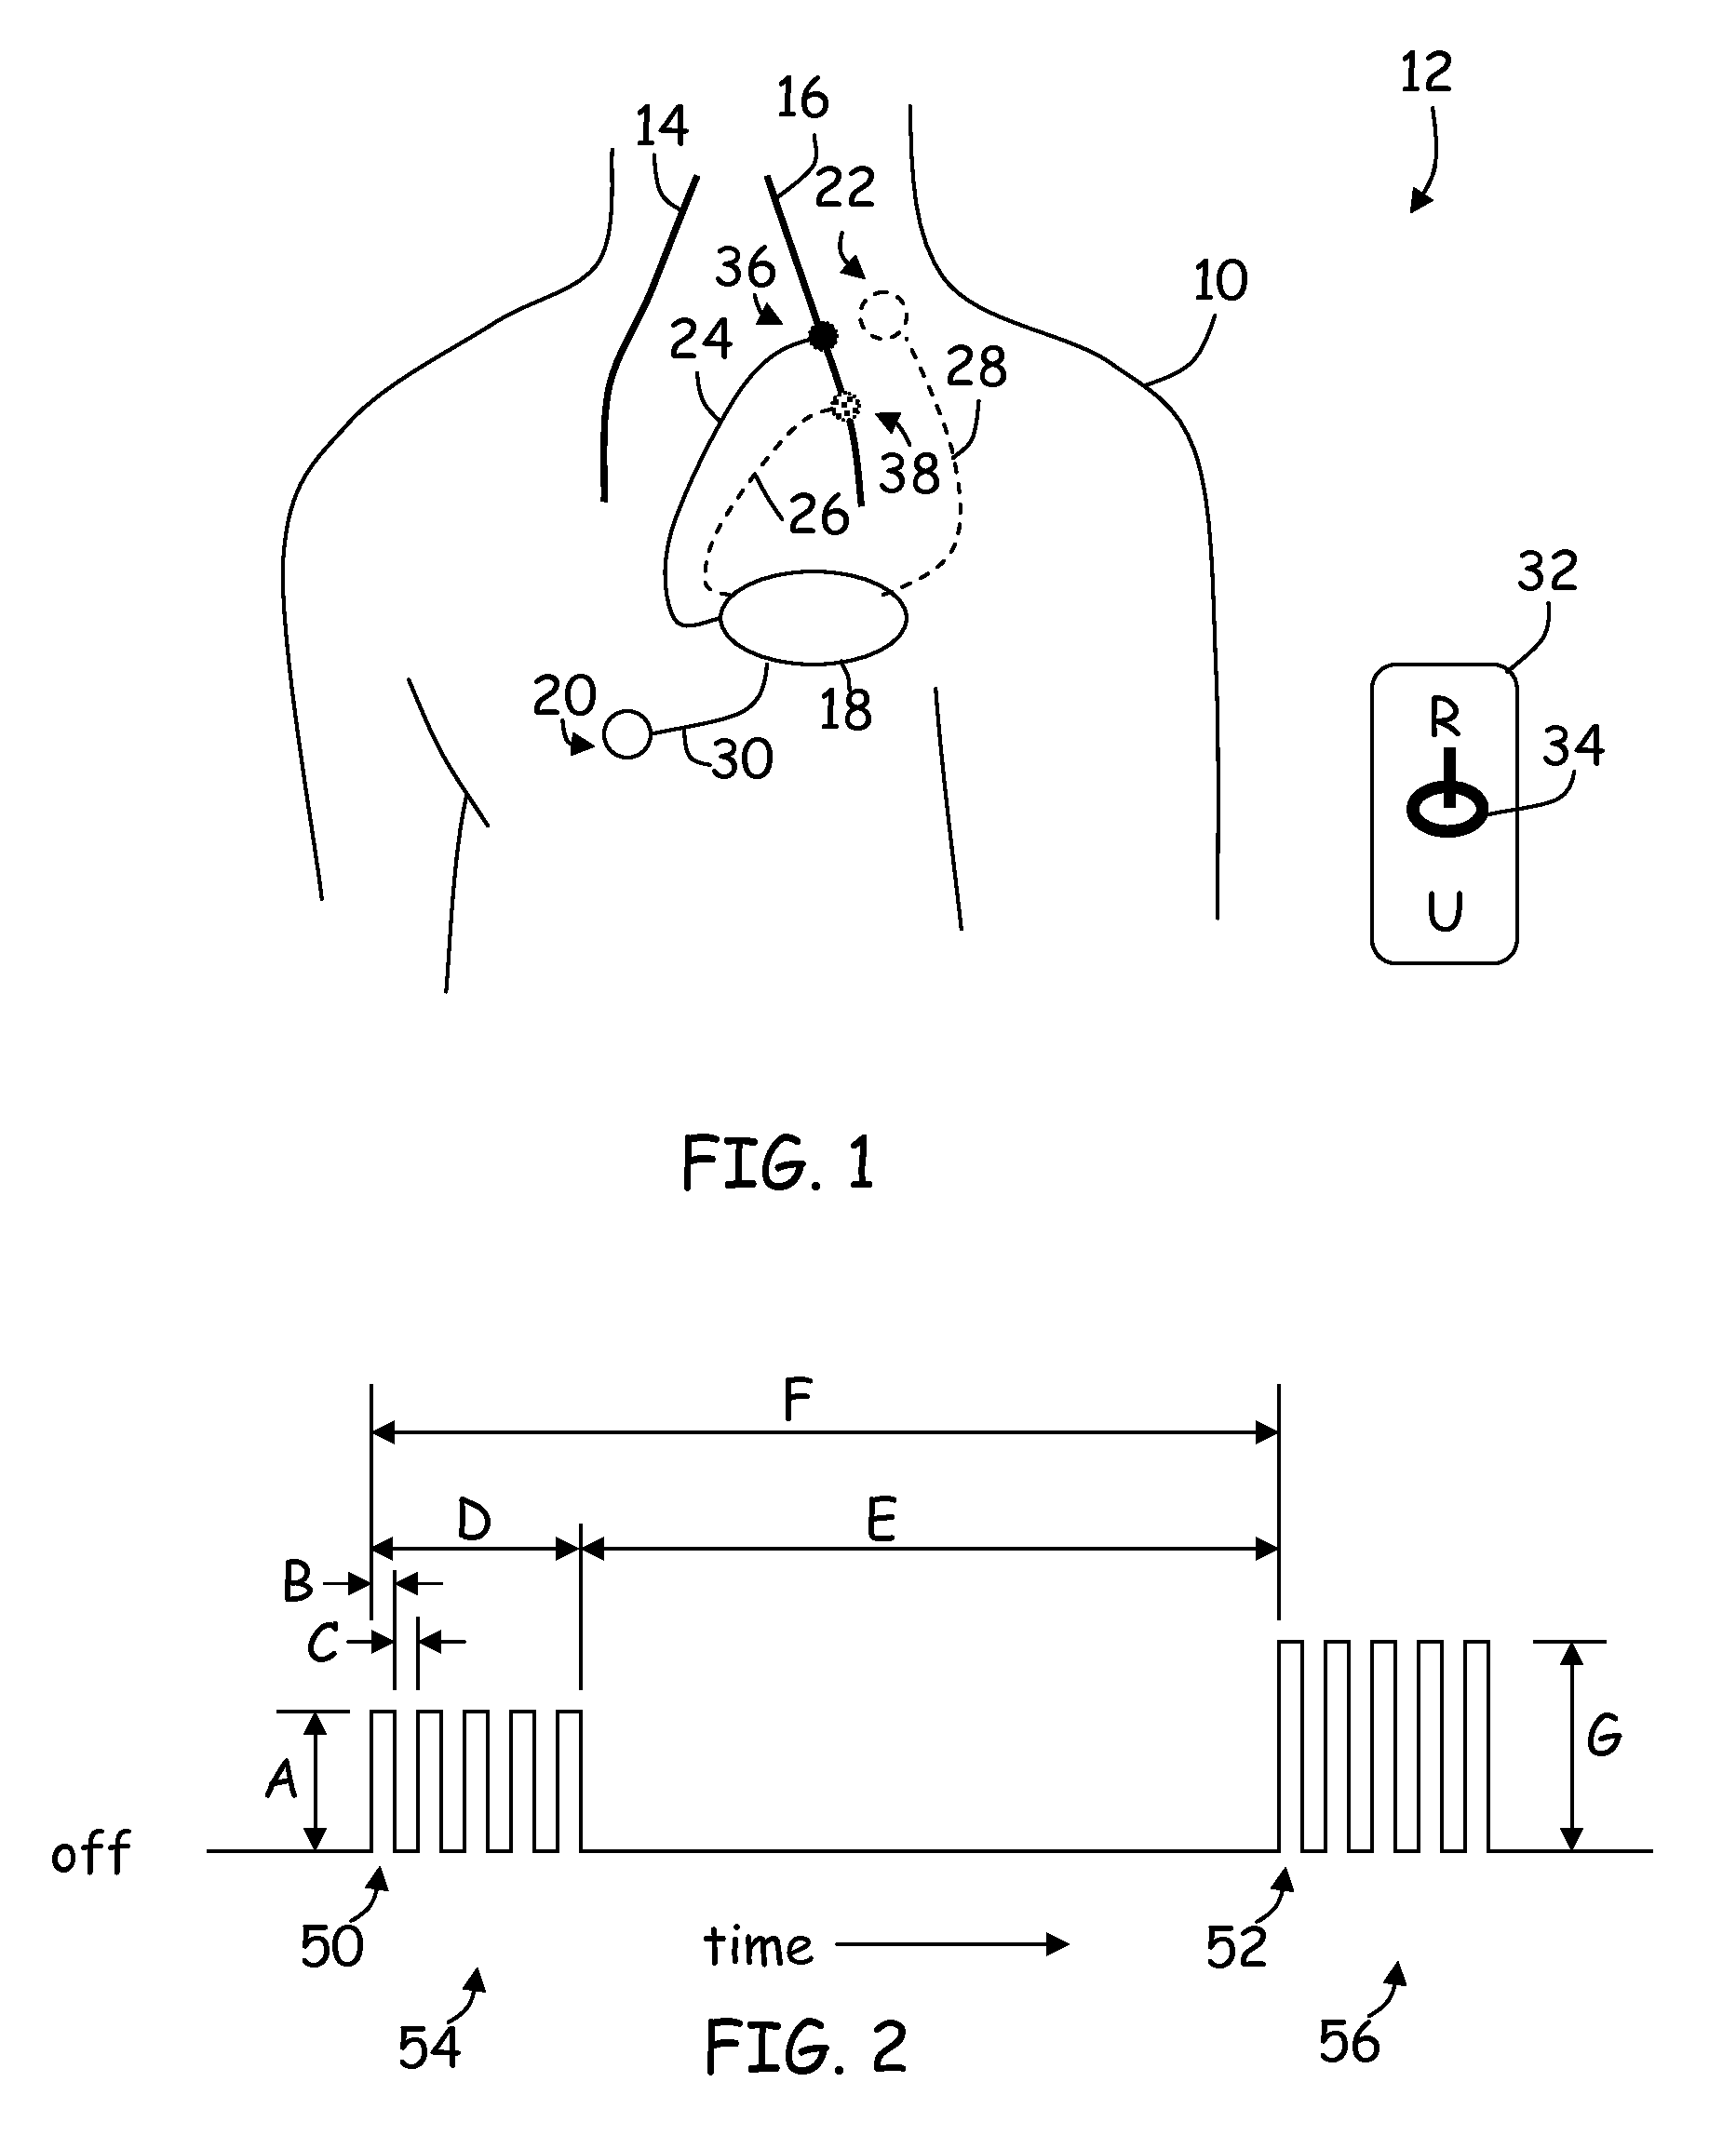 Method and apparatus to enhance therapy during stimulation of vagus nerve